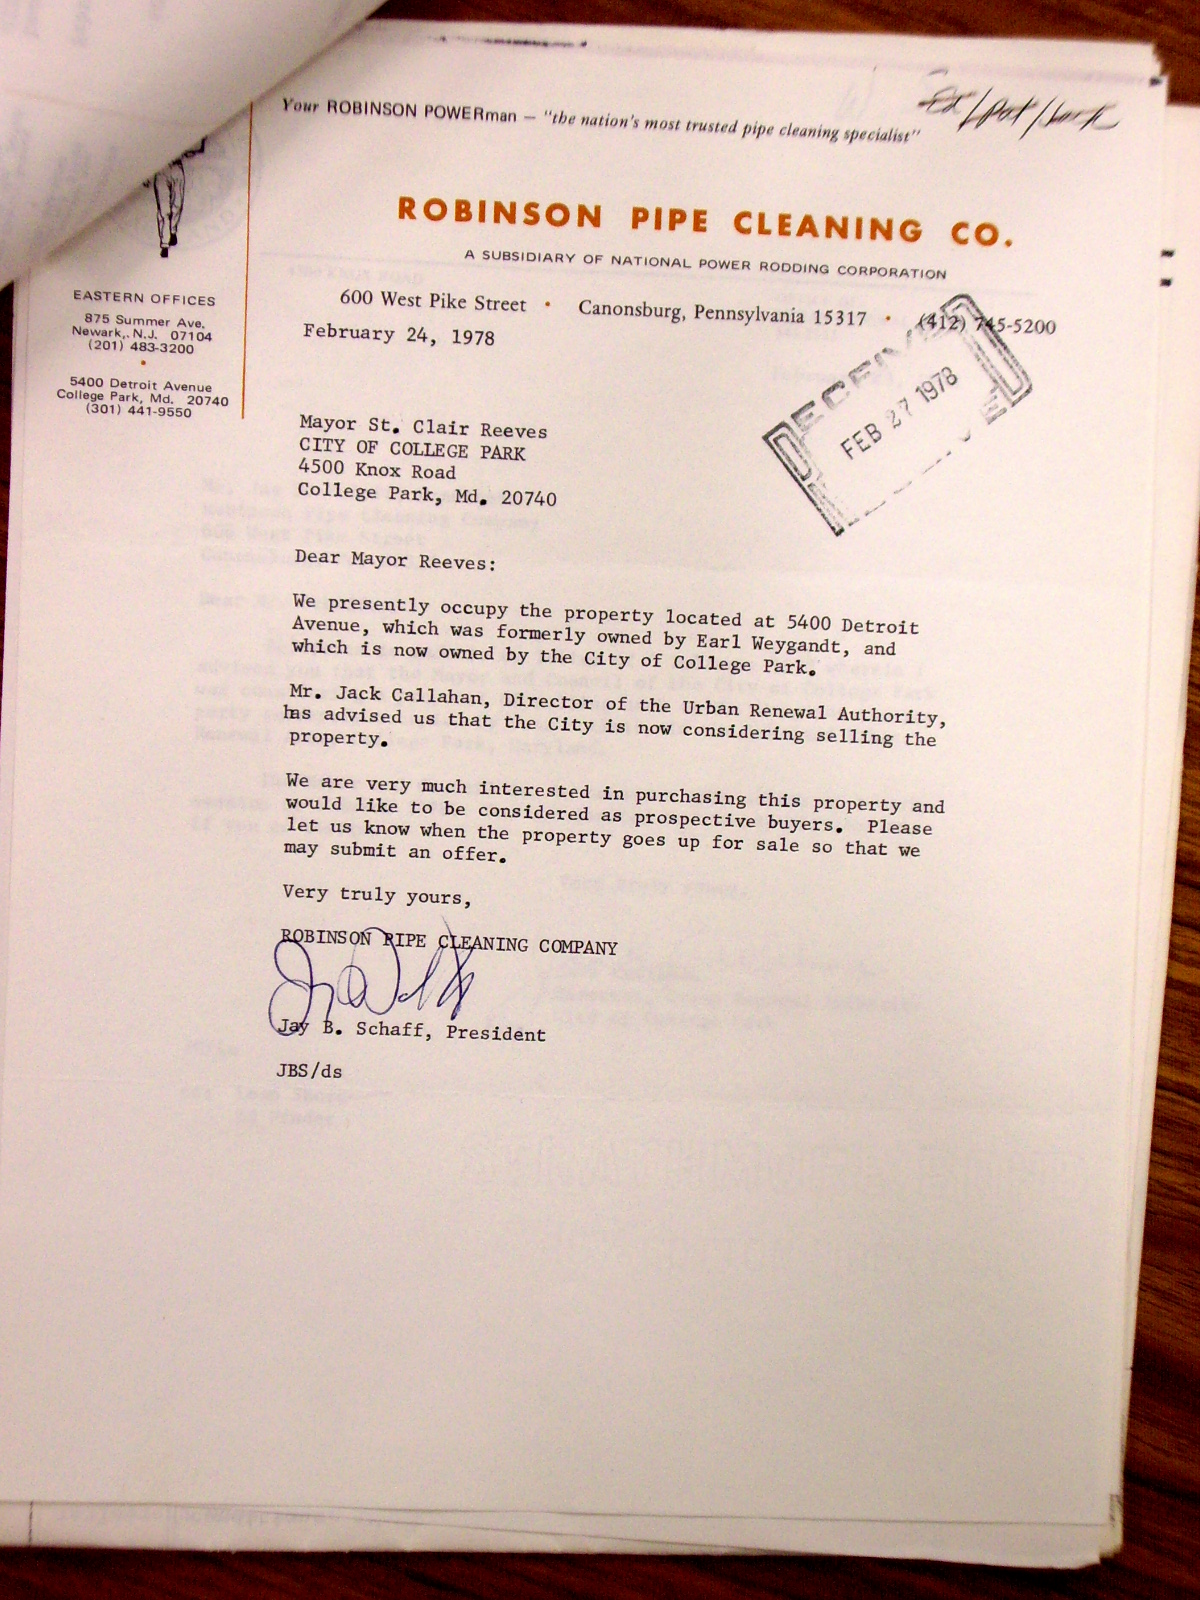 Letter to Mayor Reeves from Robinson Pipe Cleaning Co., enclosing a reply letter to Robinson Cleaning from Jack Callahan